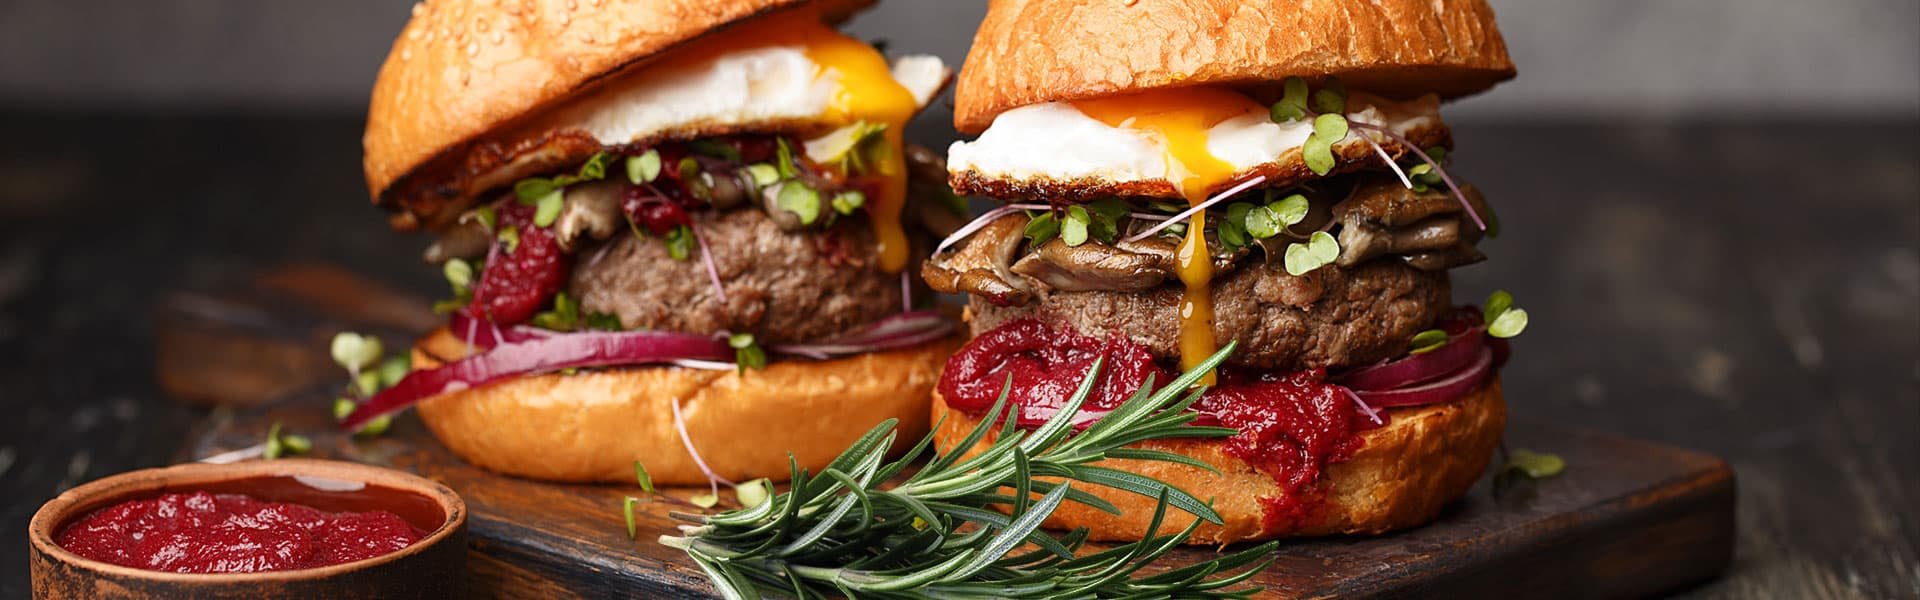 Two burgers with rosemary